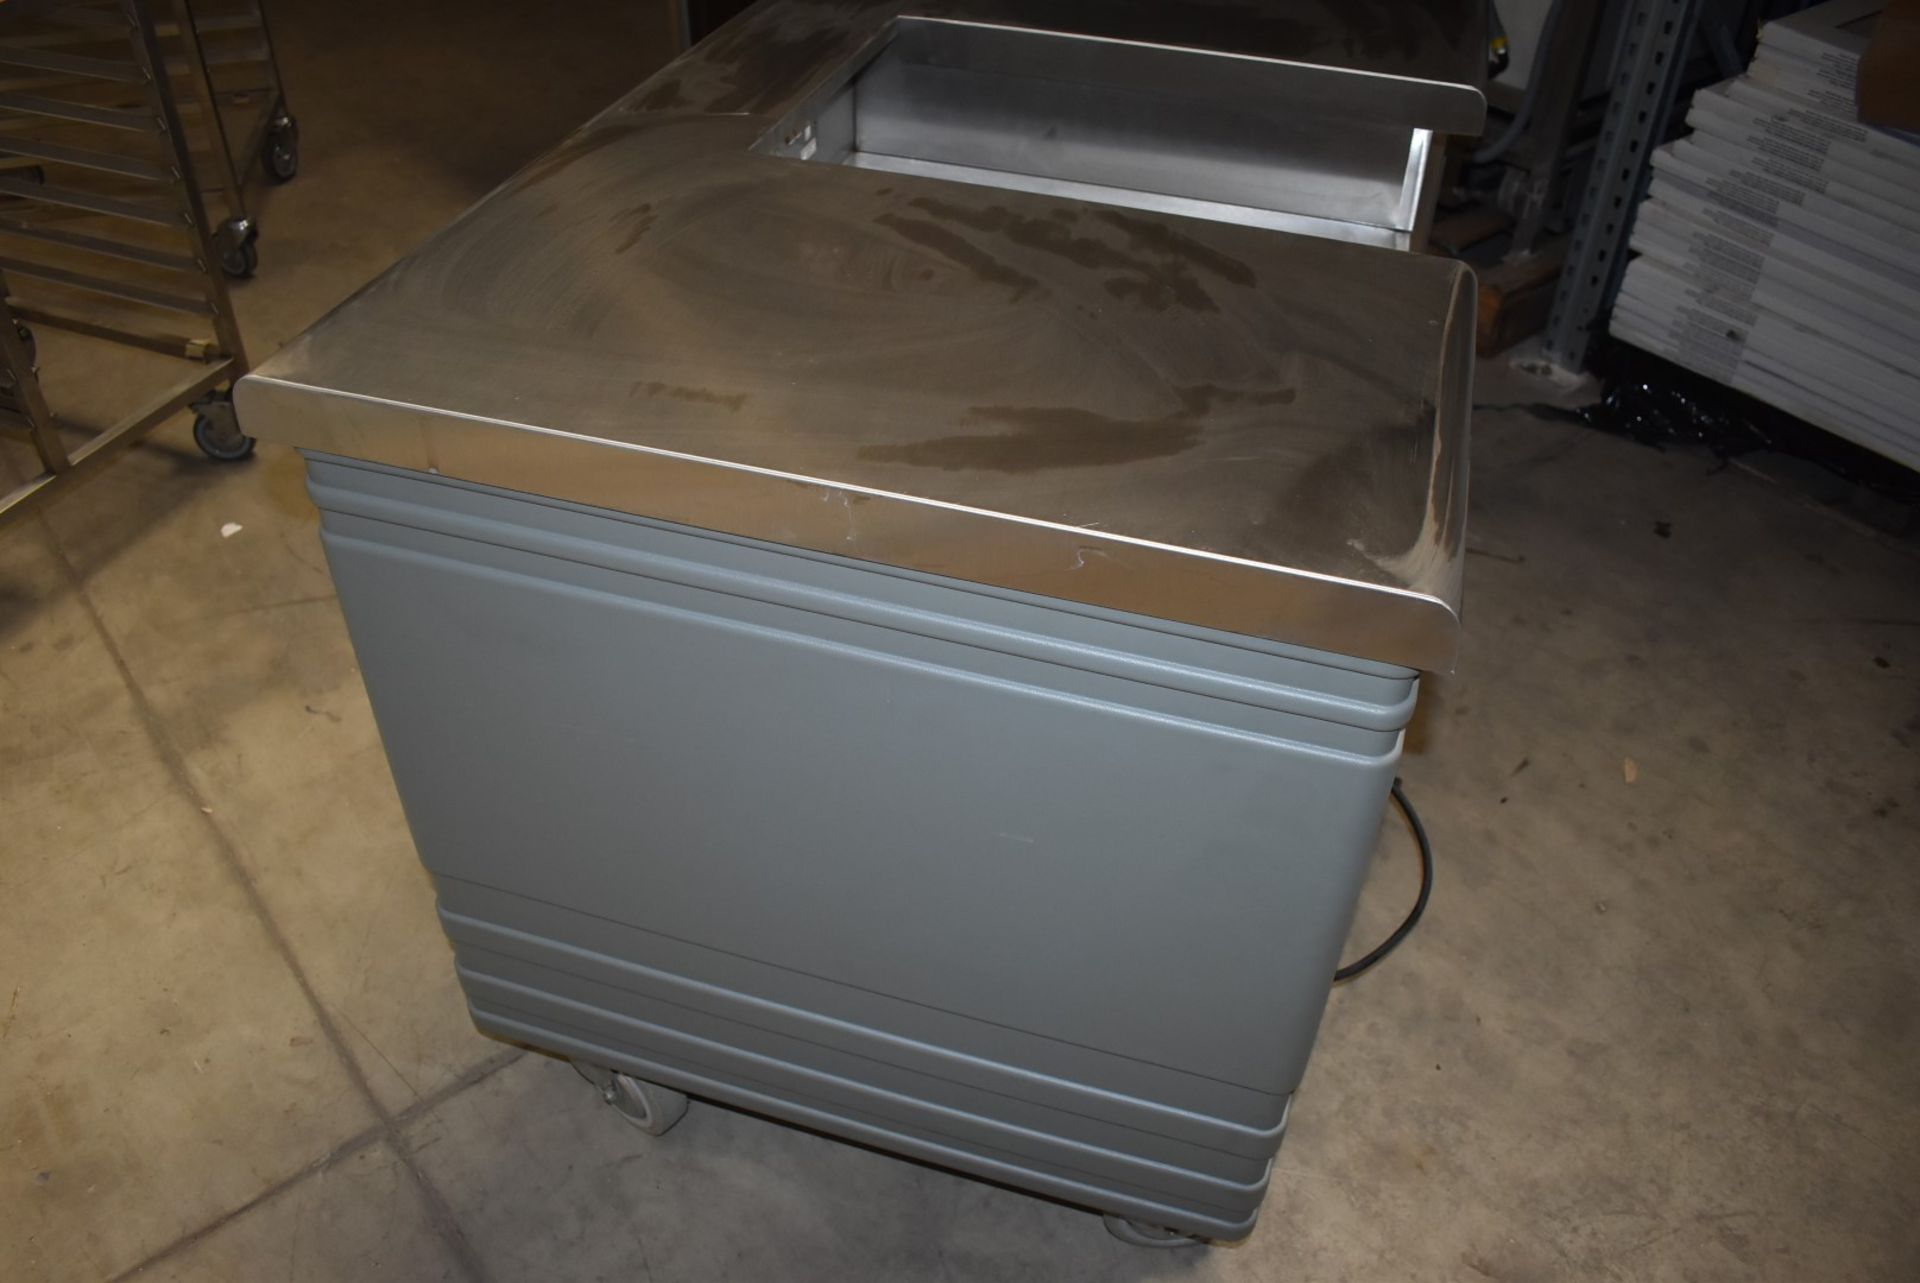 1 x Grundy Commercial Mobile Servery Unit With Stainless Steel Top Featuring Insert For Appliance or - Image 7 of 12